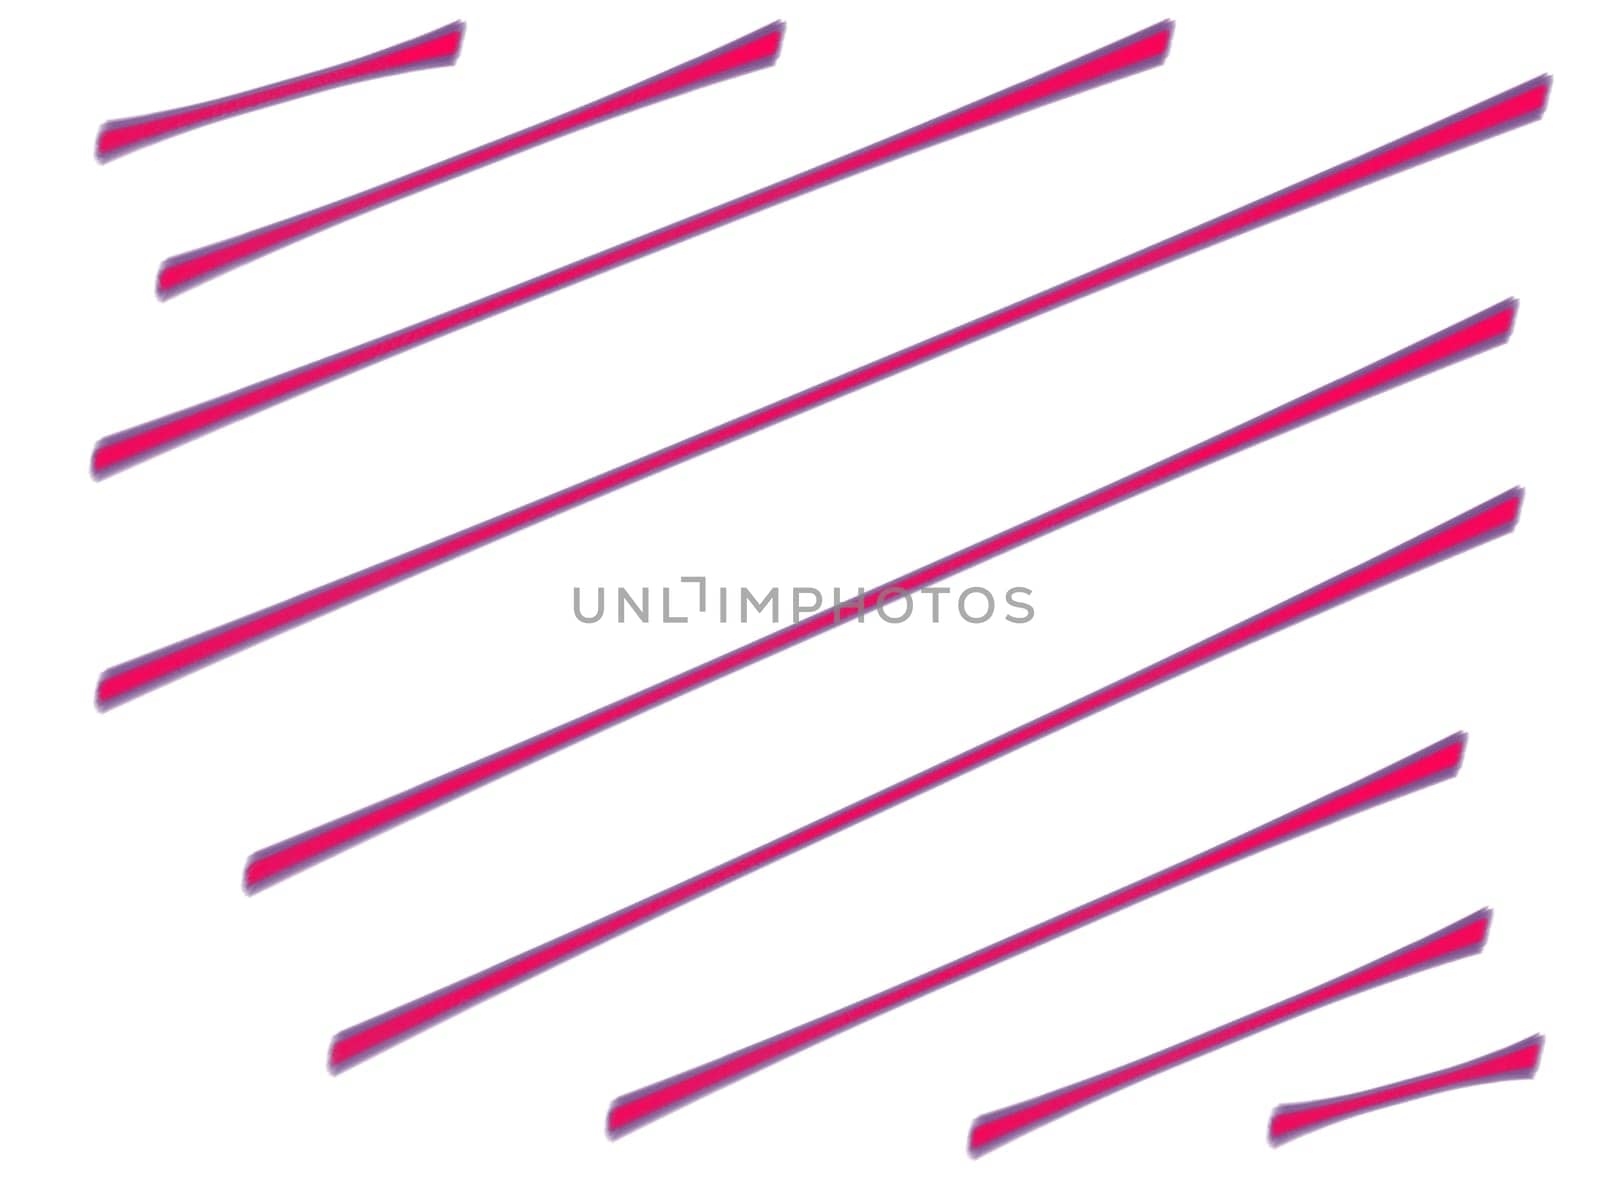 Pink and black lines across white background free space wallpaper . High quality illustration